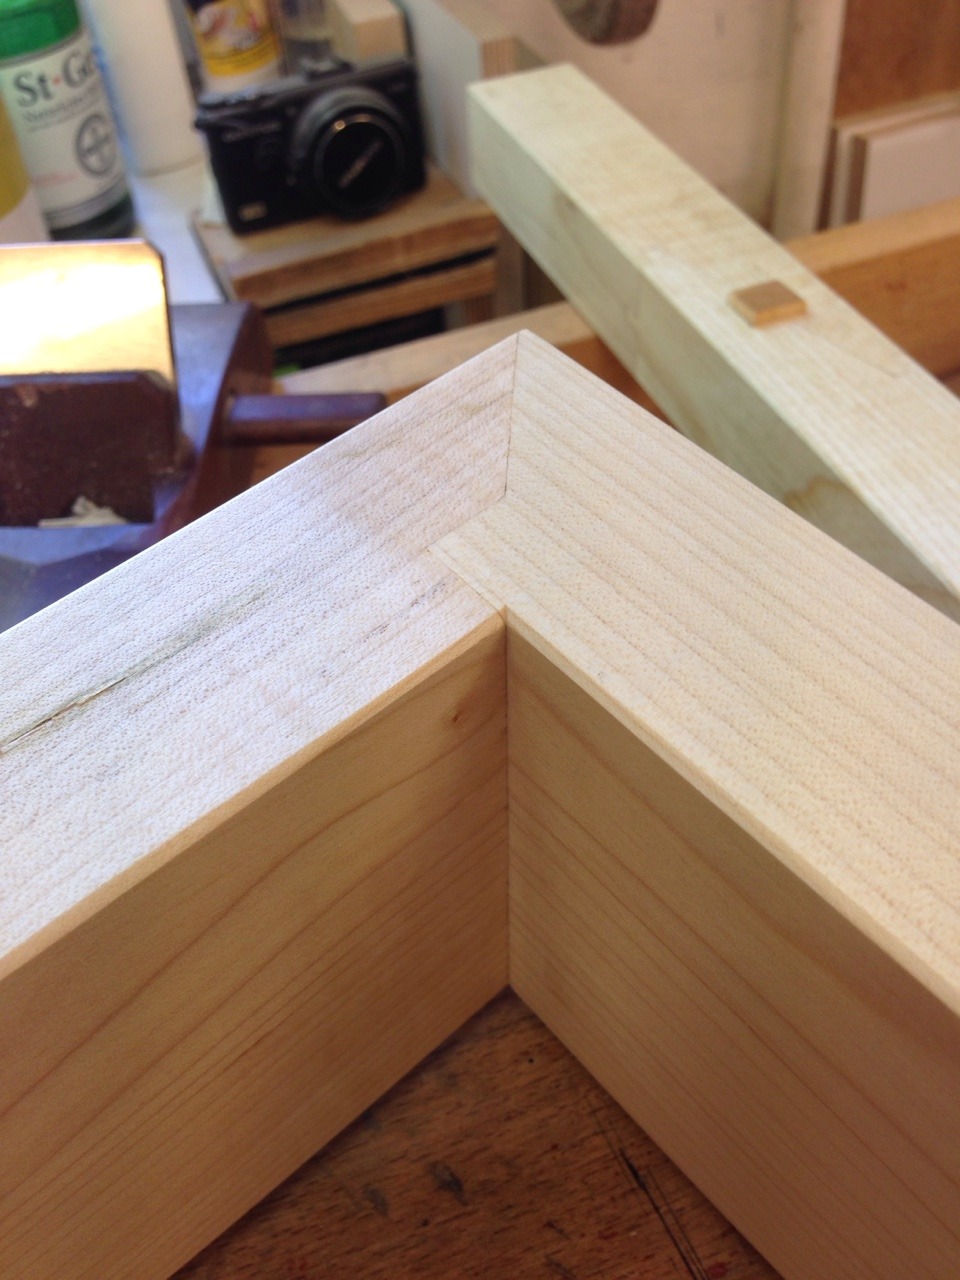  traight Grain Through tenoned rabbeted miter joint.